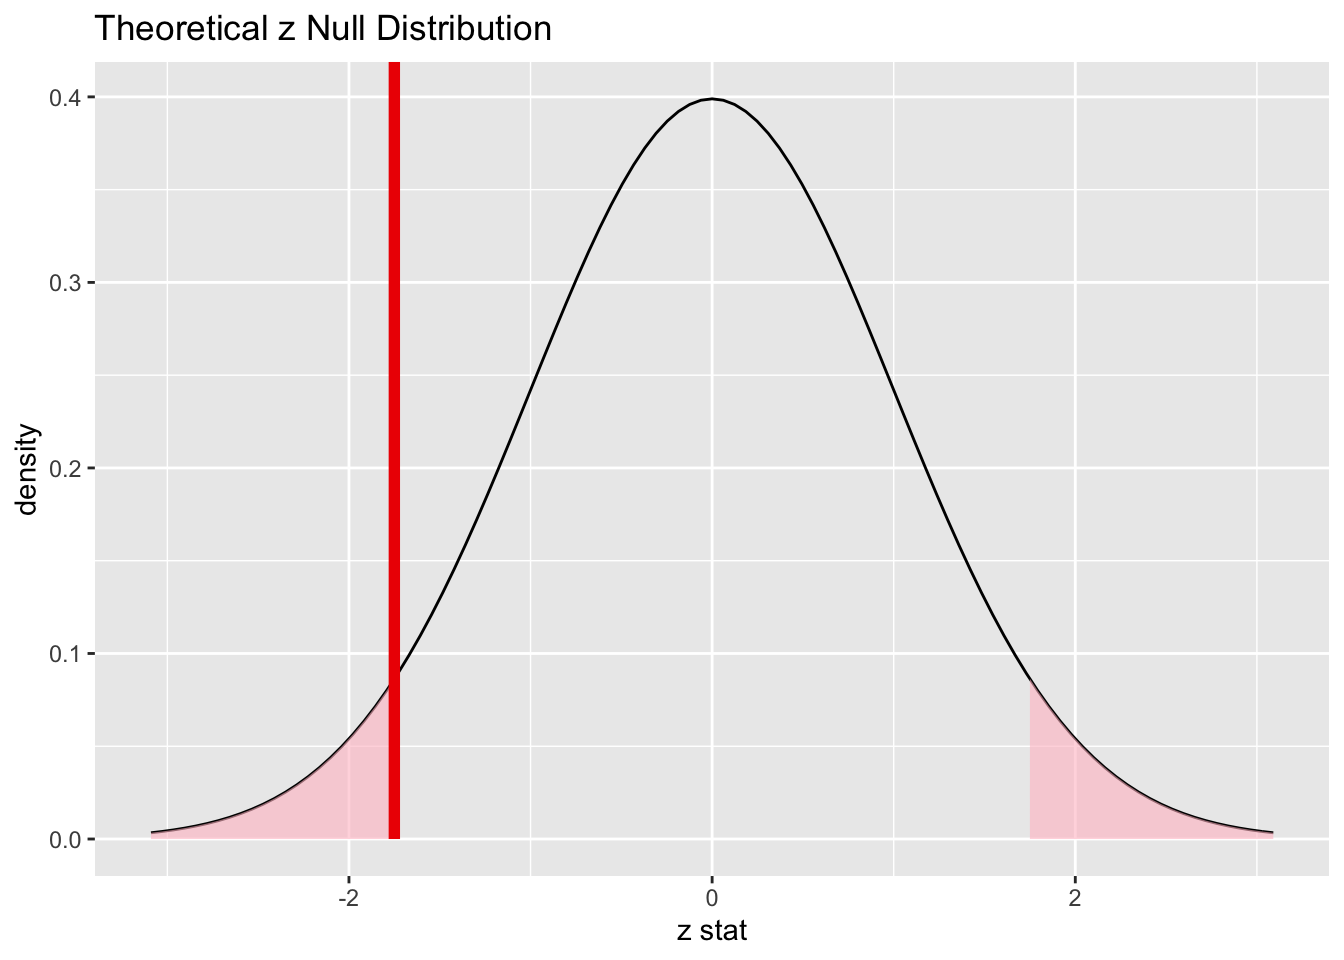 Theory-based null distribution for percentage of satisfied customers.